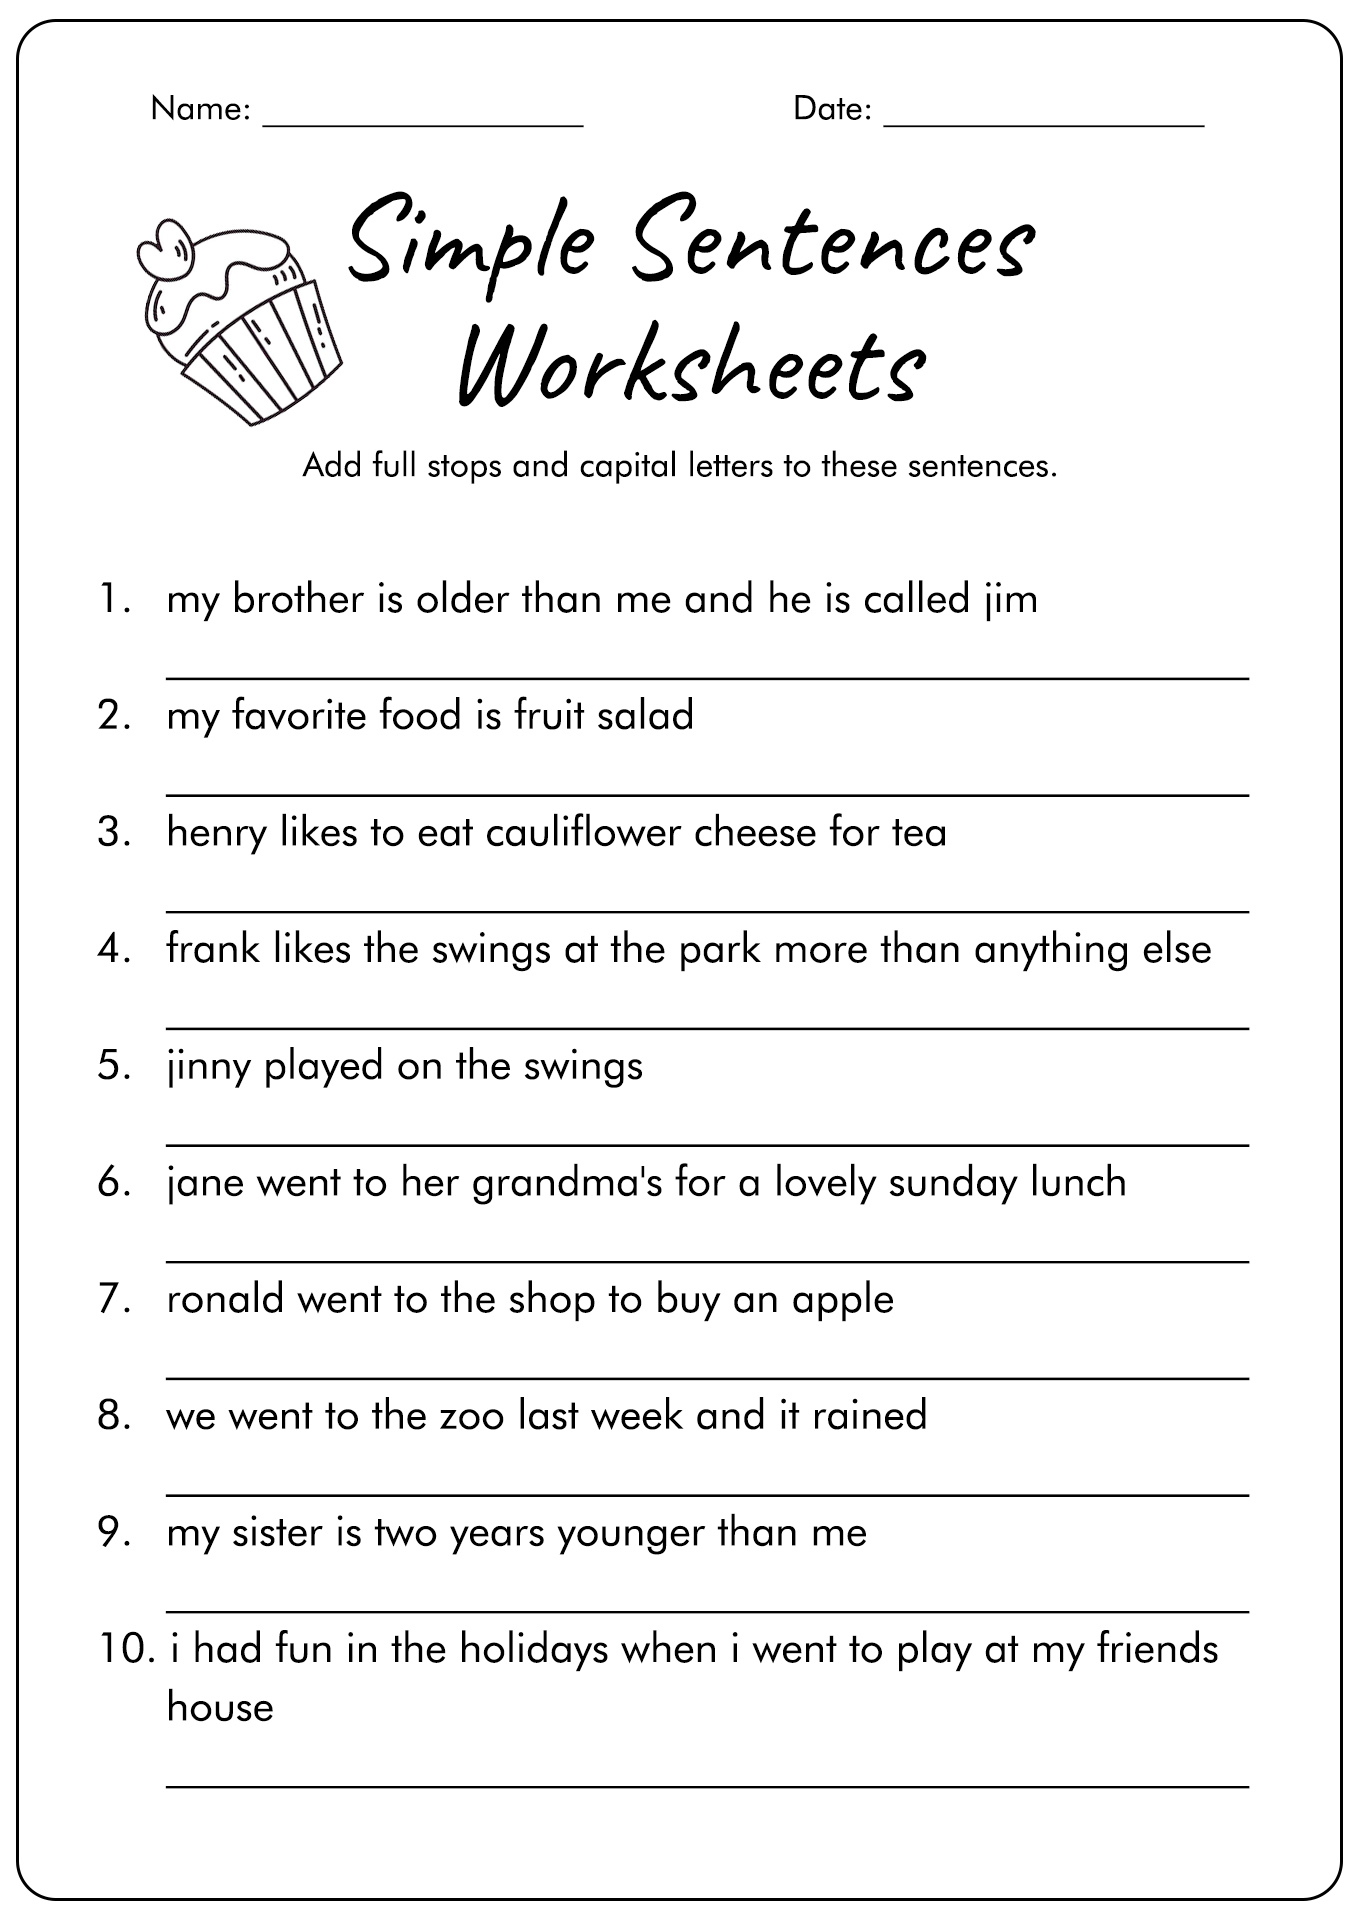 Simple Sentence Worksheets For 4th Grade